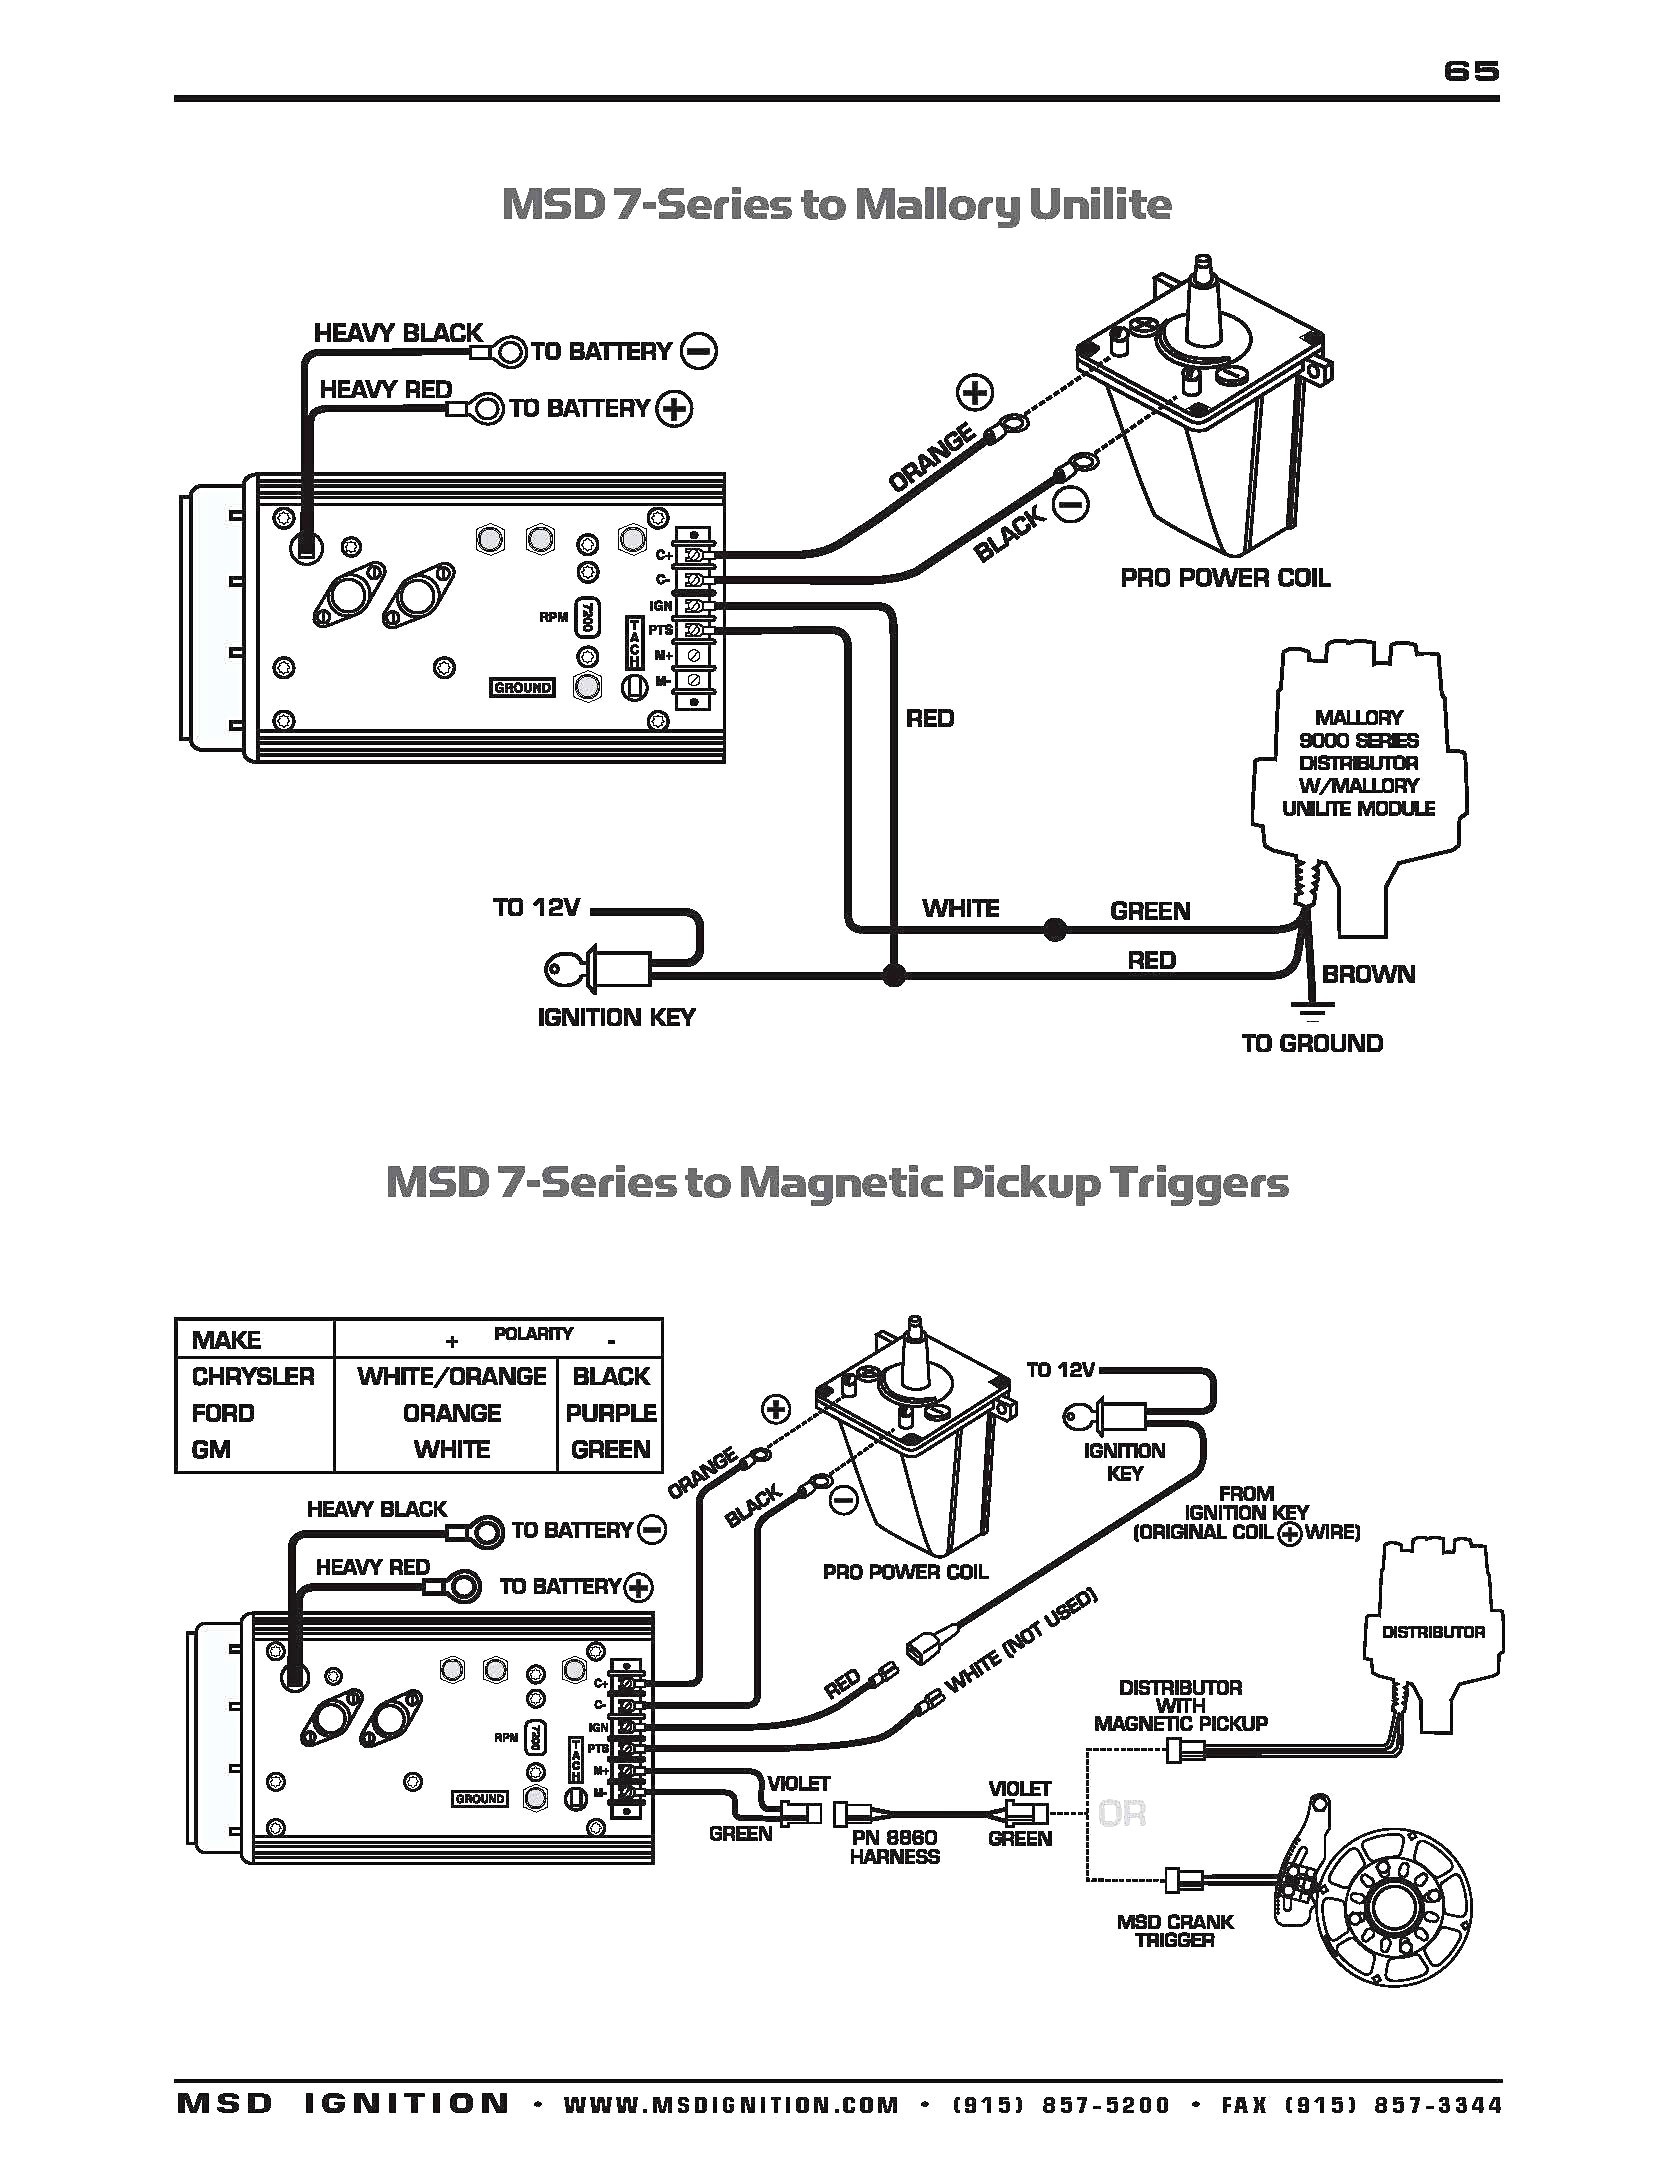 Mallory Ignition Wiring Diagram Thoritsolutions In Diagrams Best